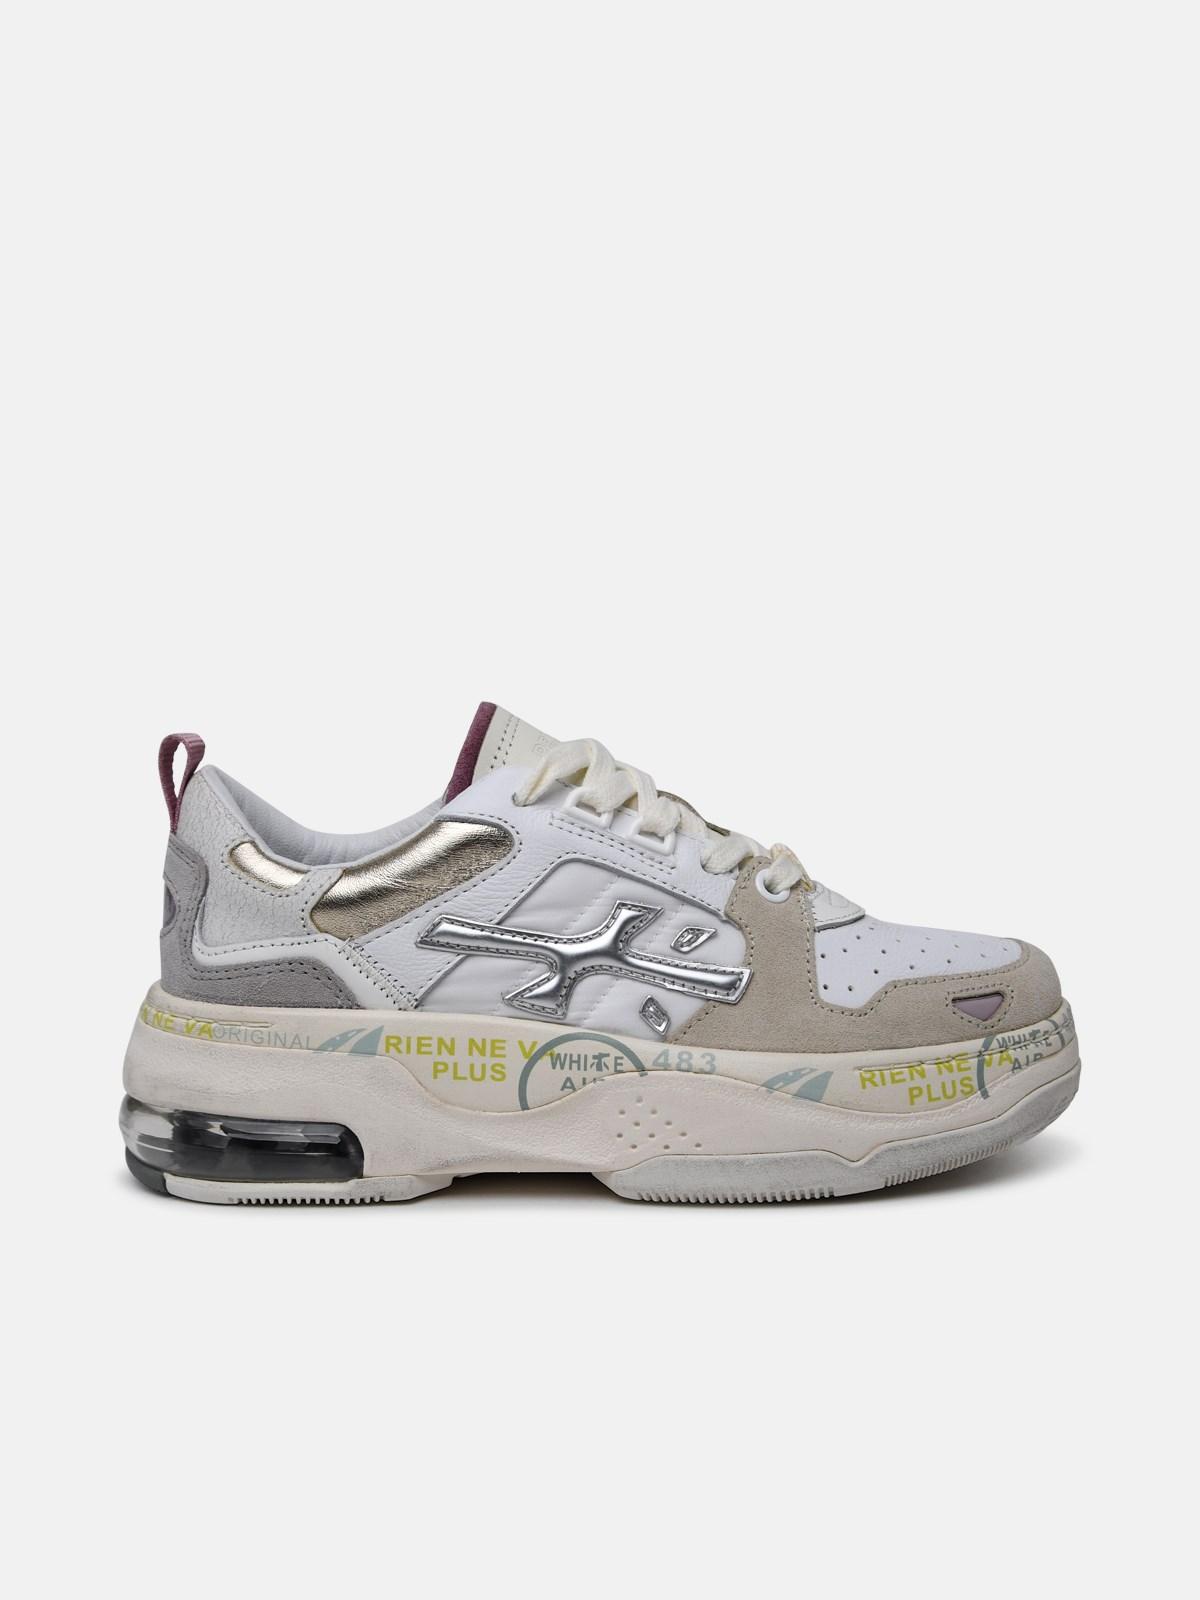 Premiata 'draked' Multicolor Leather Blend Sneakers in Gray | Lyst